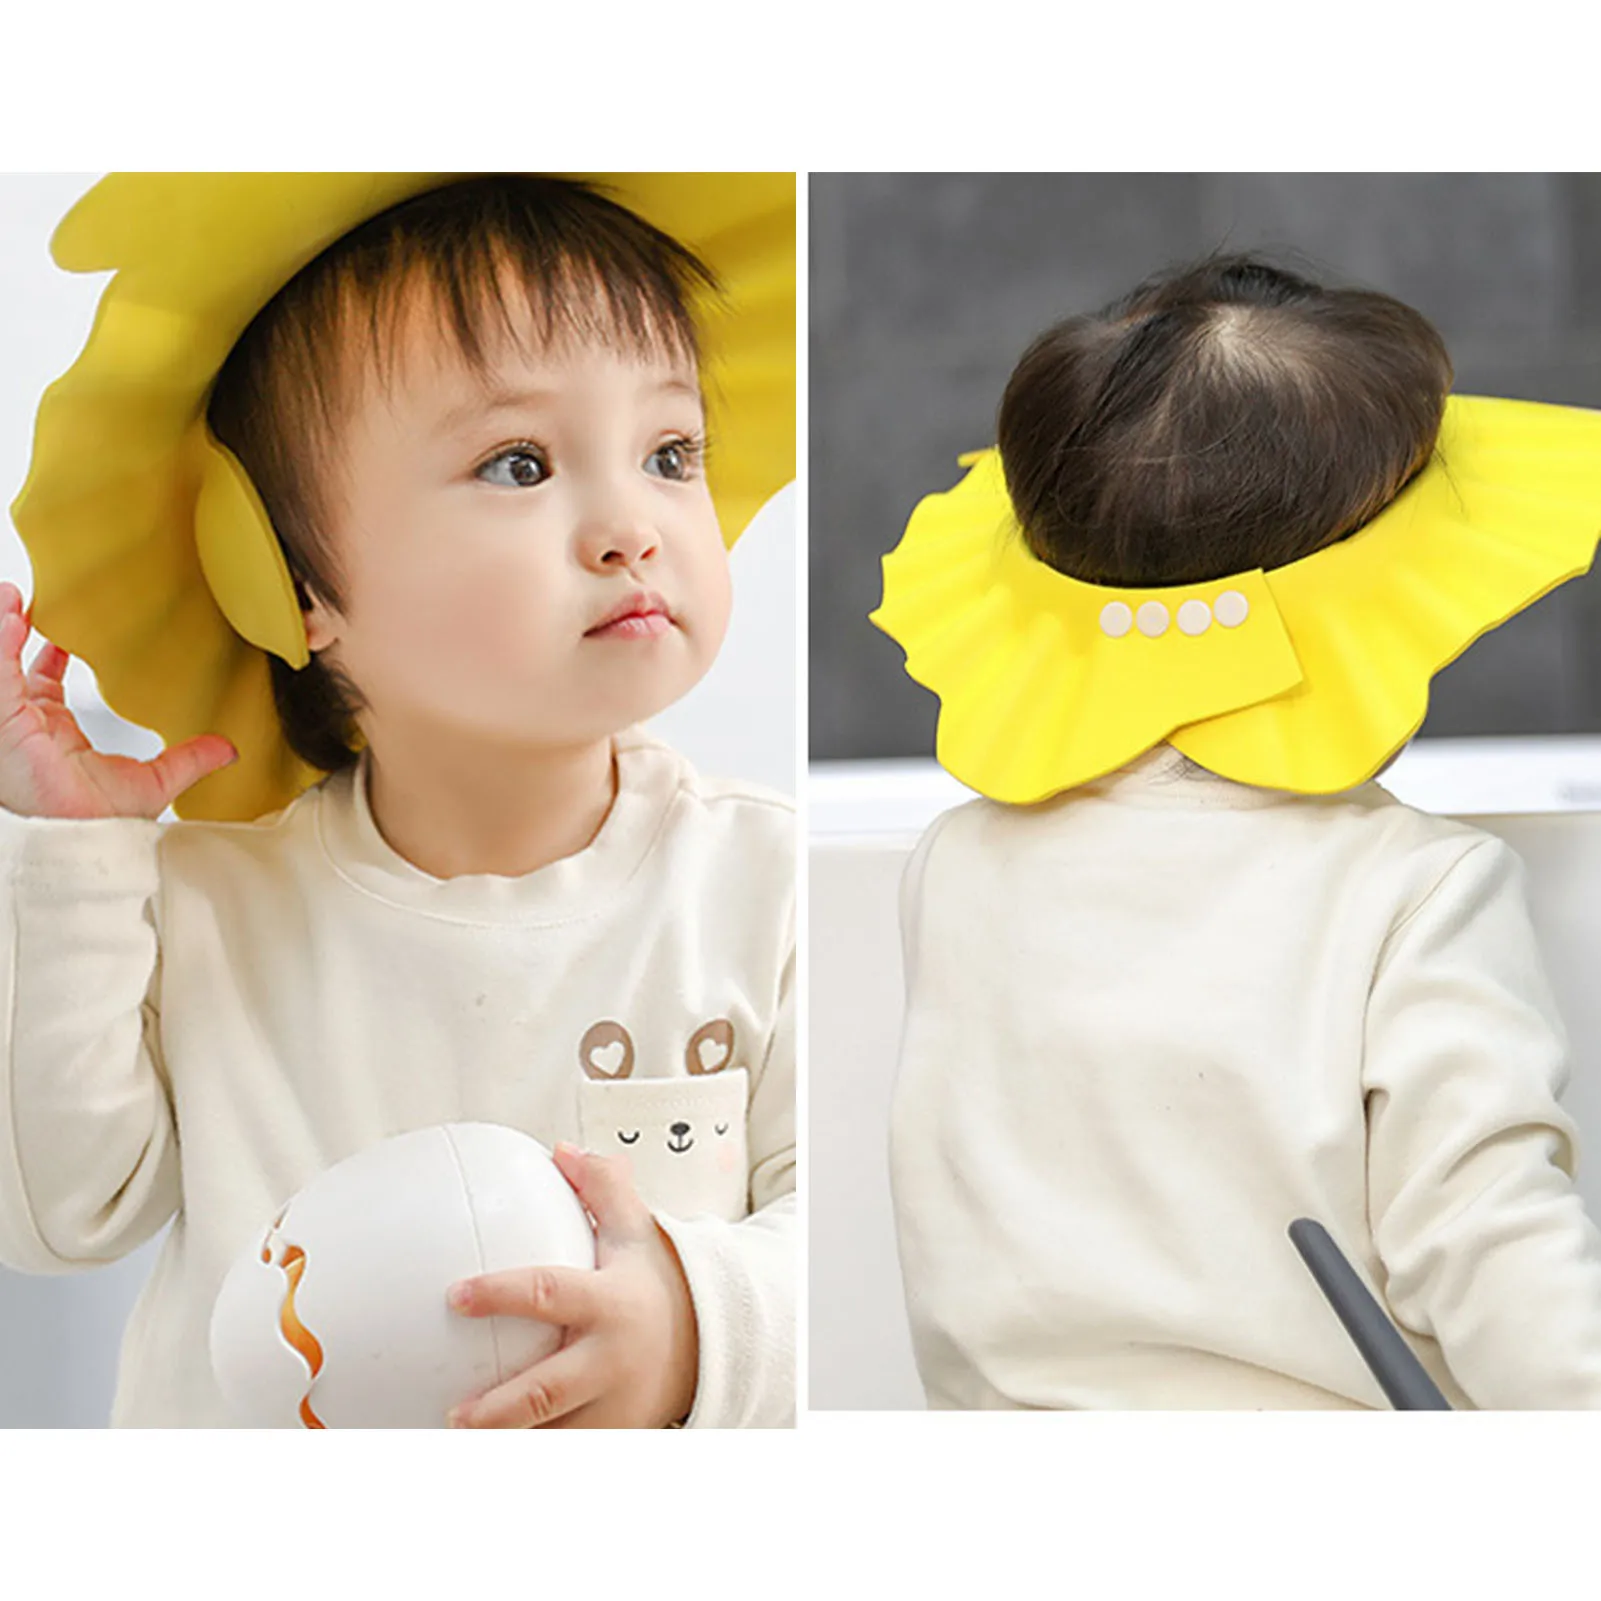 Baby Shower Soft Caps Adjustable Hair Wash Hat for Kids Ear Protection Safe Children Shampoo Bathing Shower Protect Head Cover